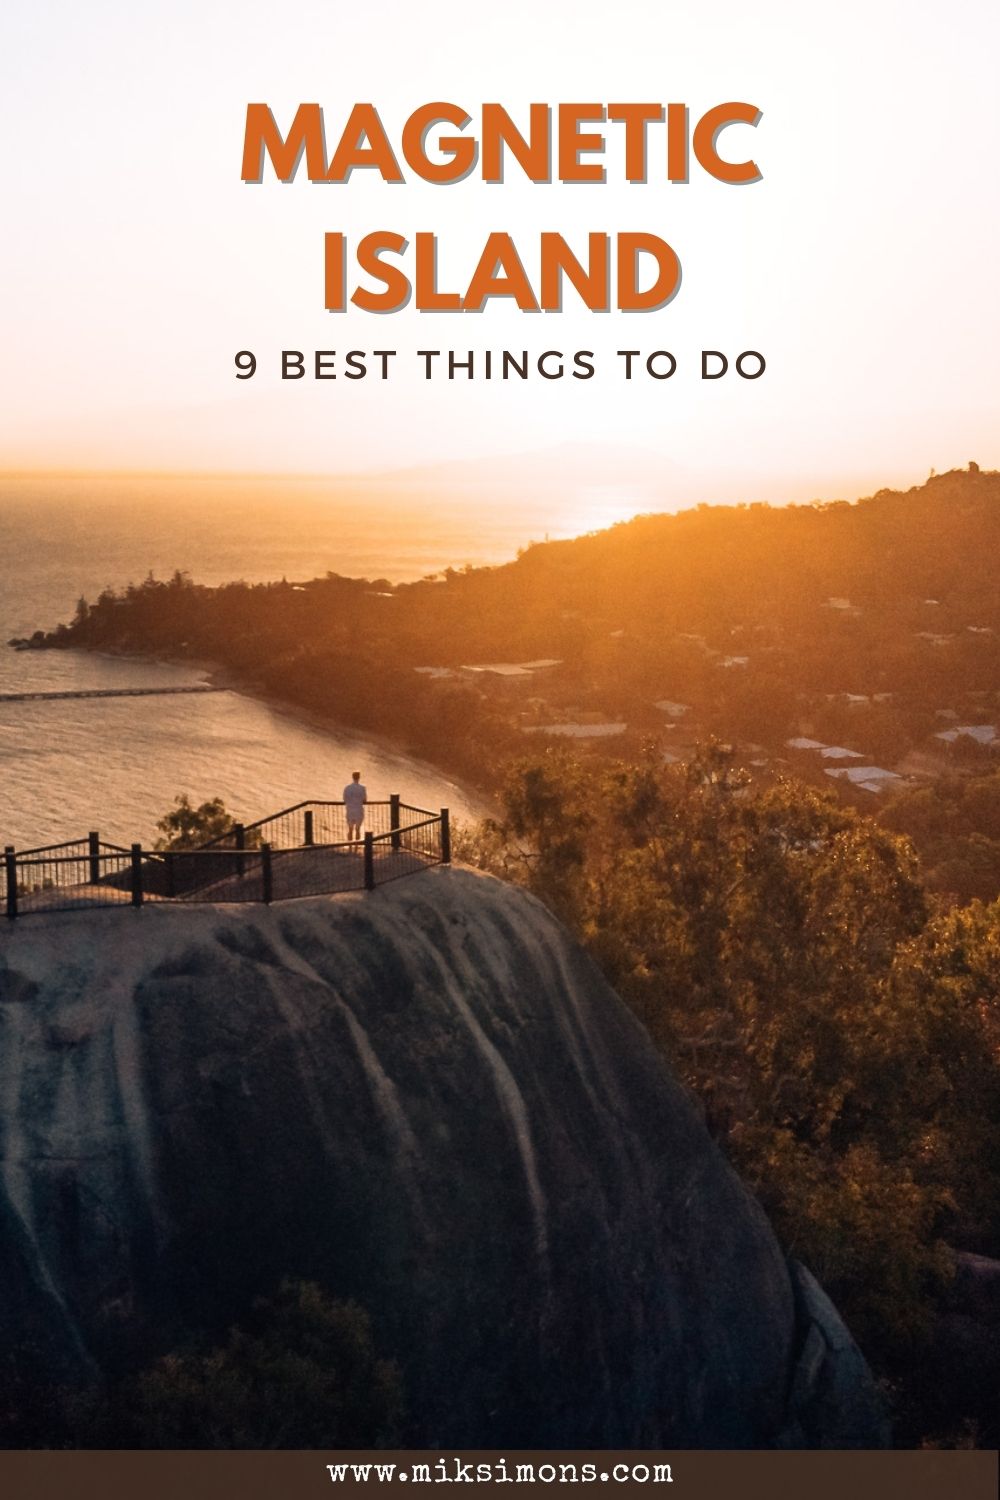 9 best things to do on Magnetic Island2